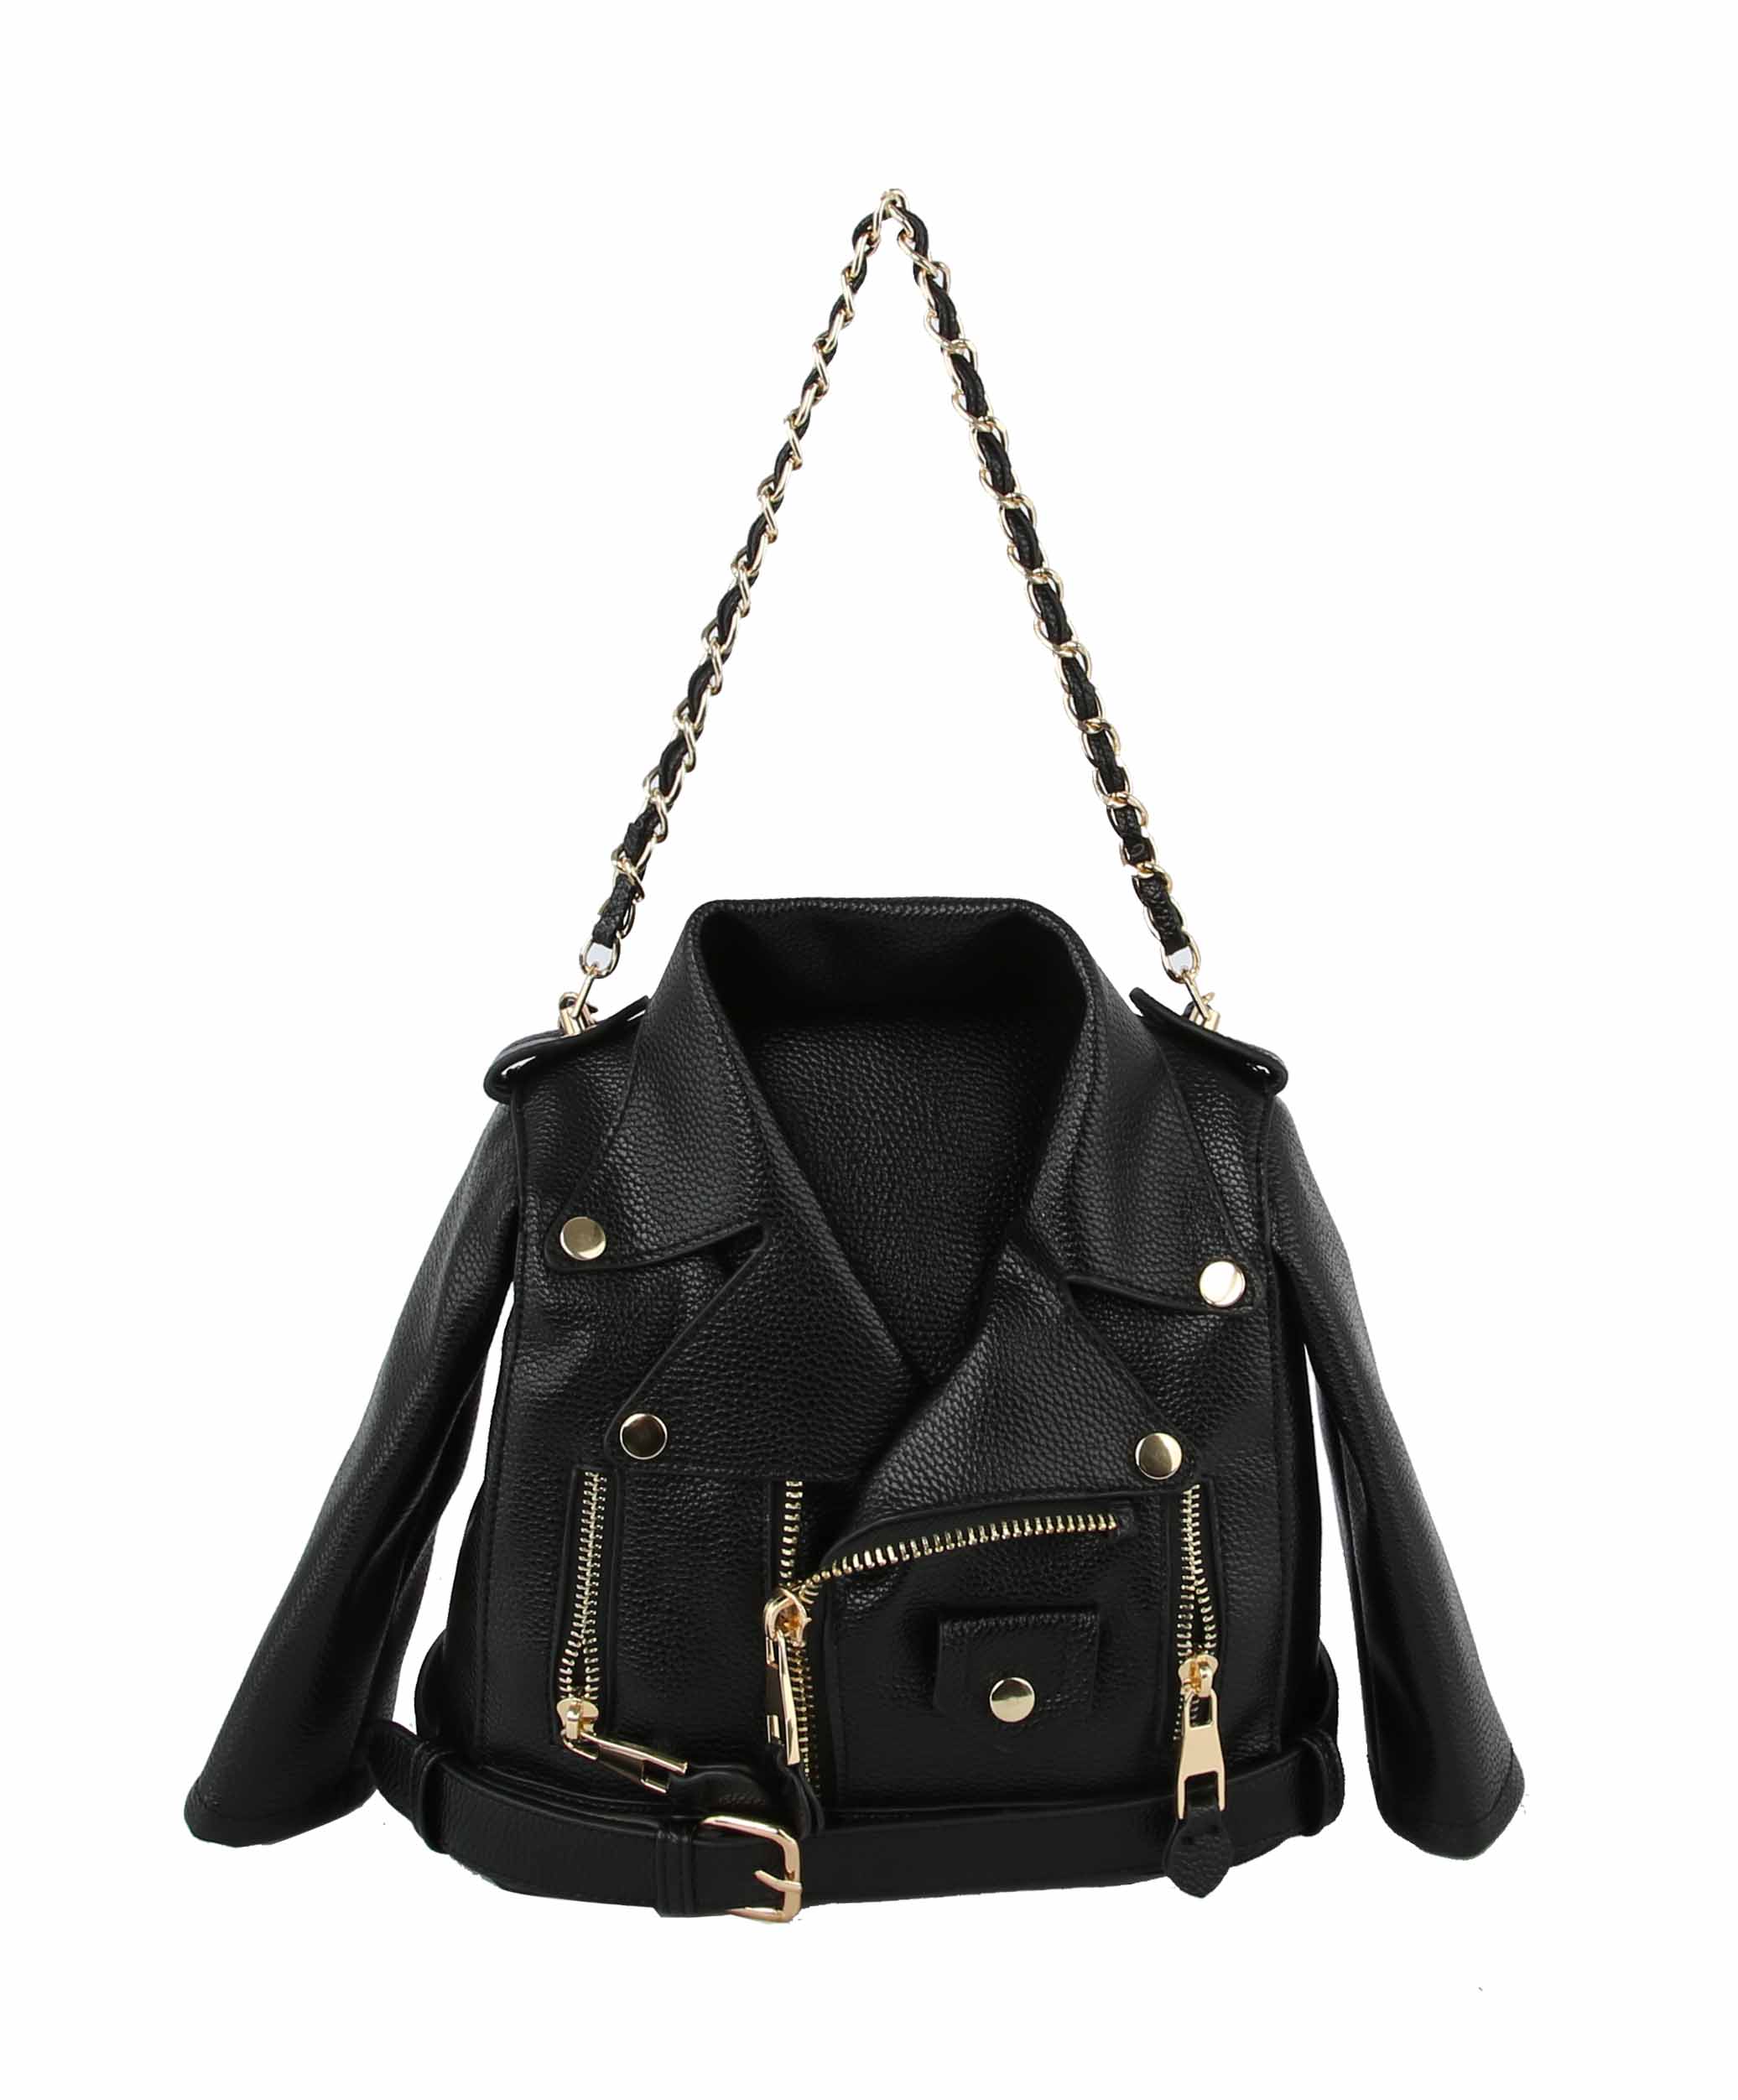 LEATHER JACKET CONVERTIBLE BACK PACK